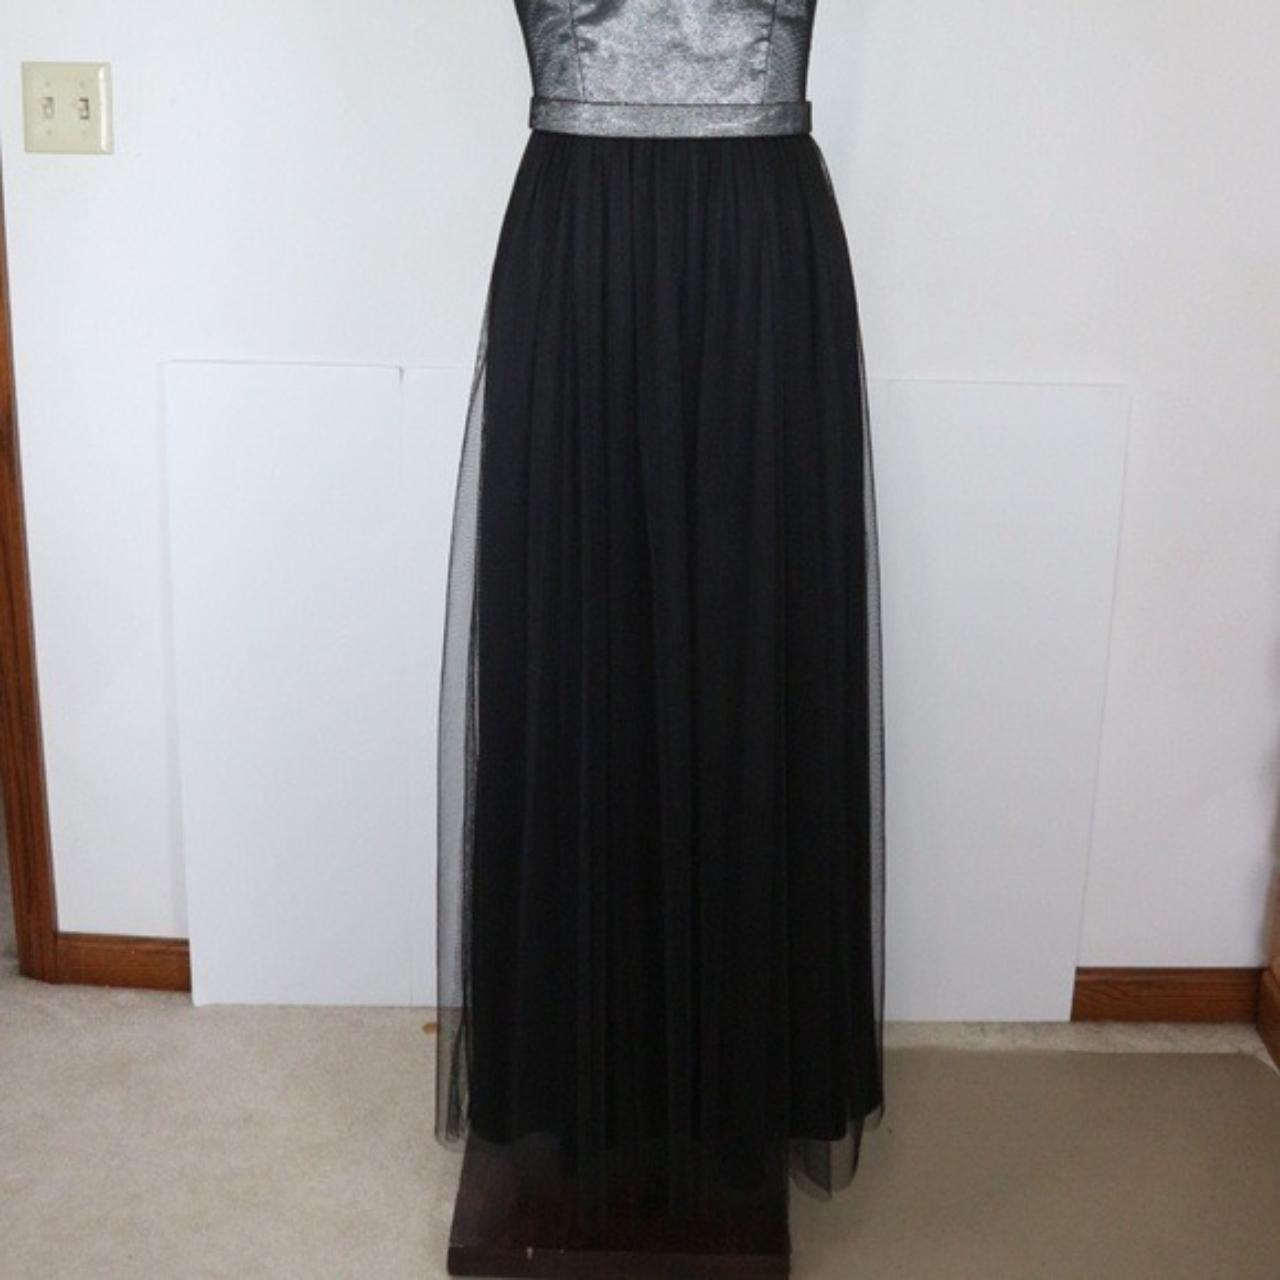 After Six Women's Black and Silver Dress (3)